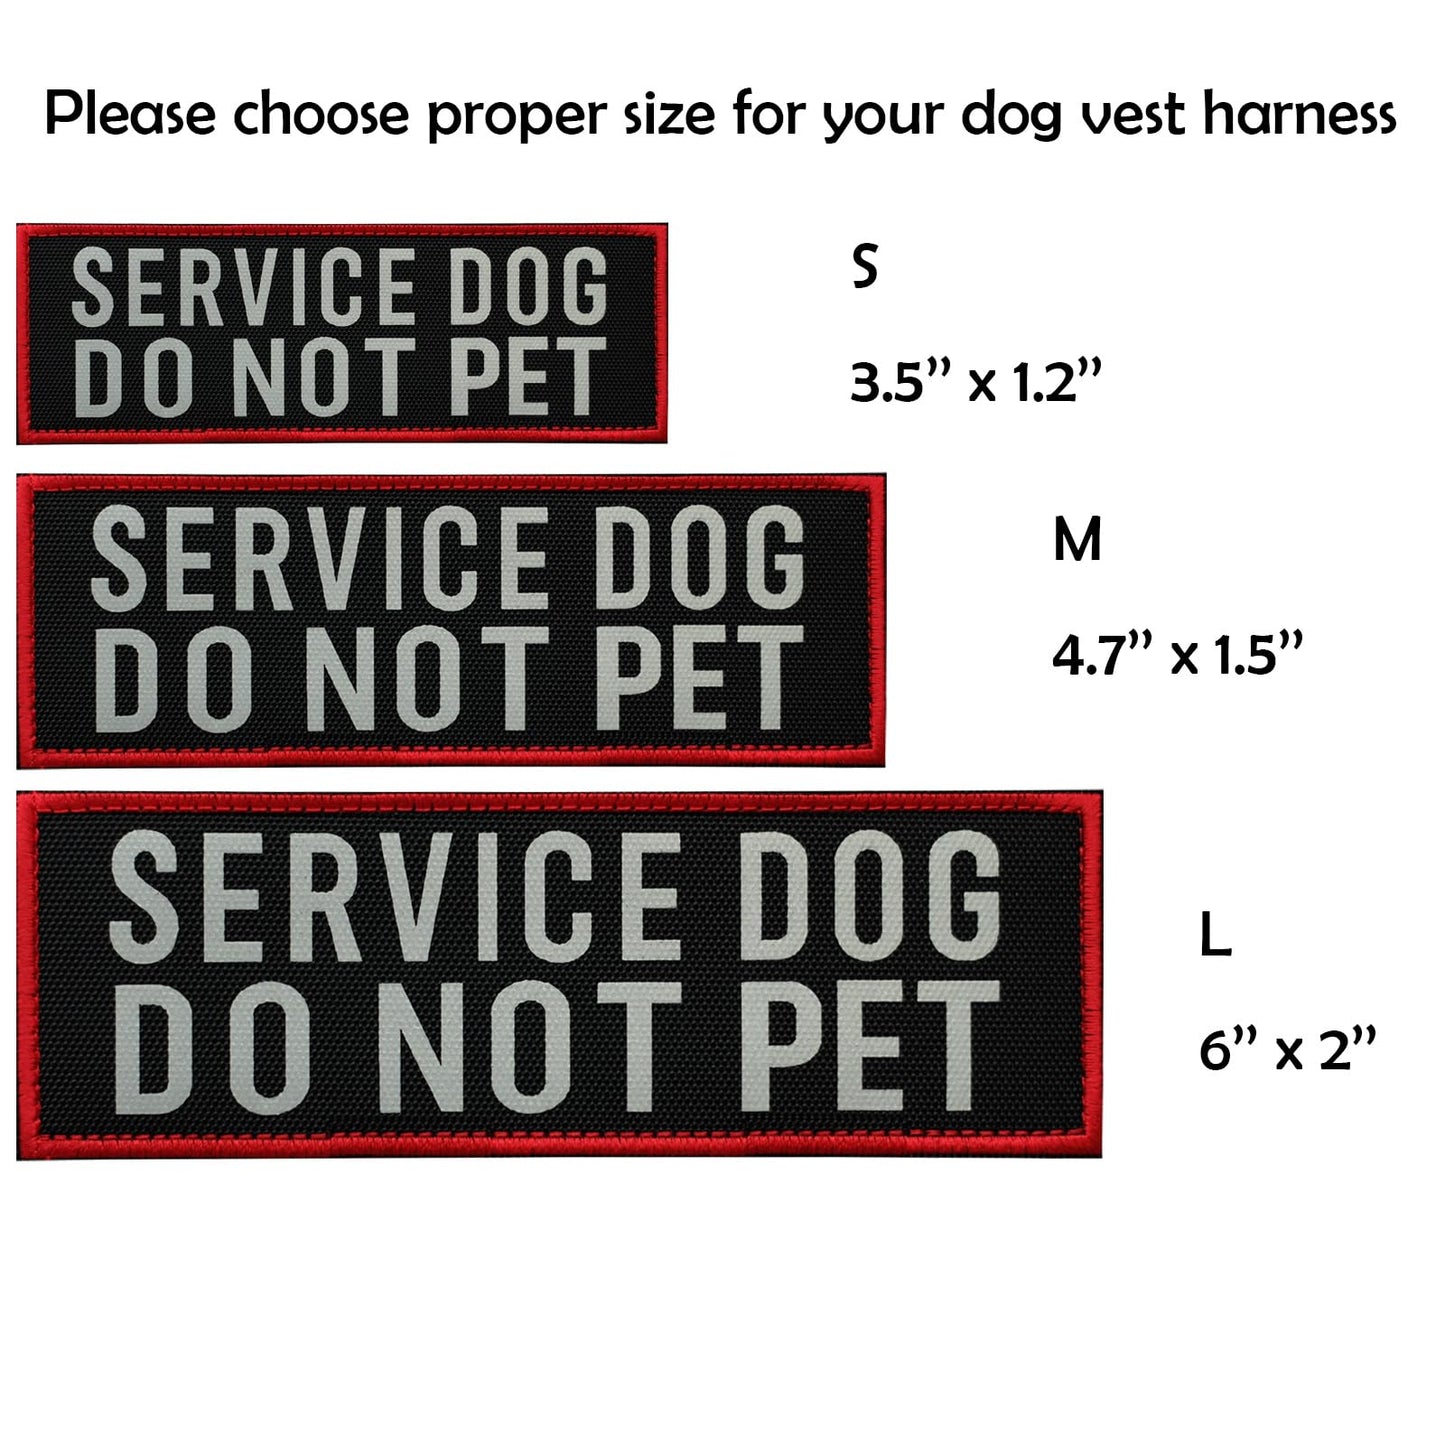 FITZNORA 2 Pcs Reflective Service Dog Do Not Pet Patch Set with Hook and Loop Fastener, Embroidered Border with Printed Letters Patch for Dog Vest Harness Collar (6 x 2 inches)